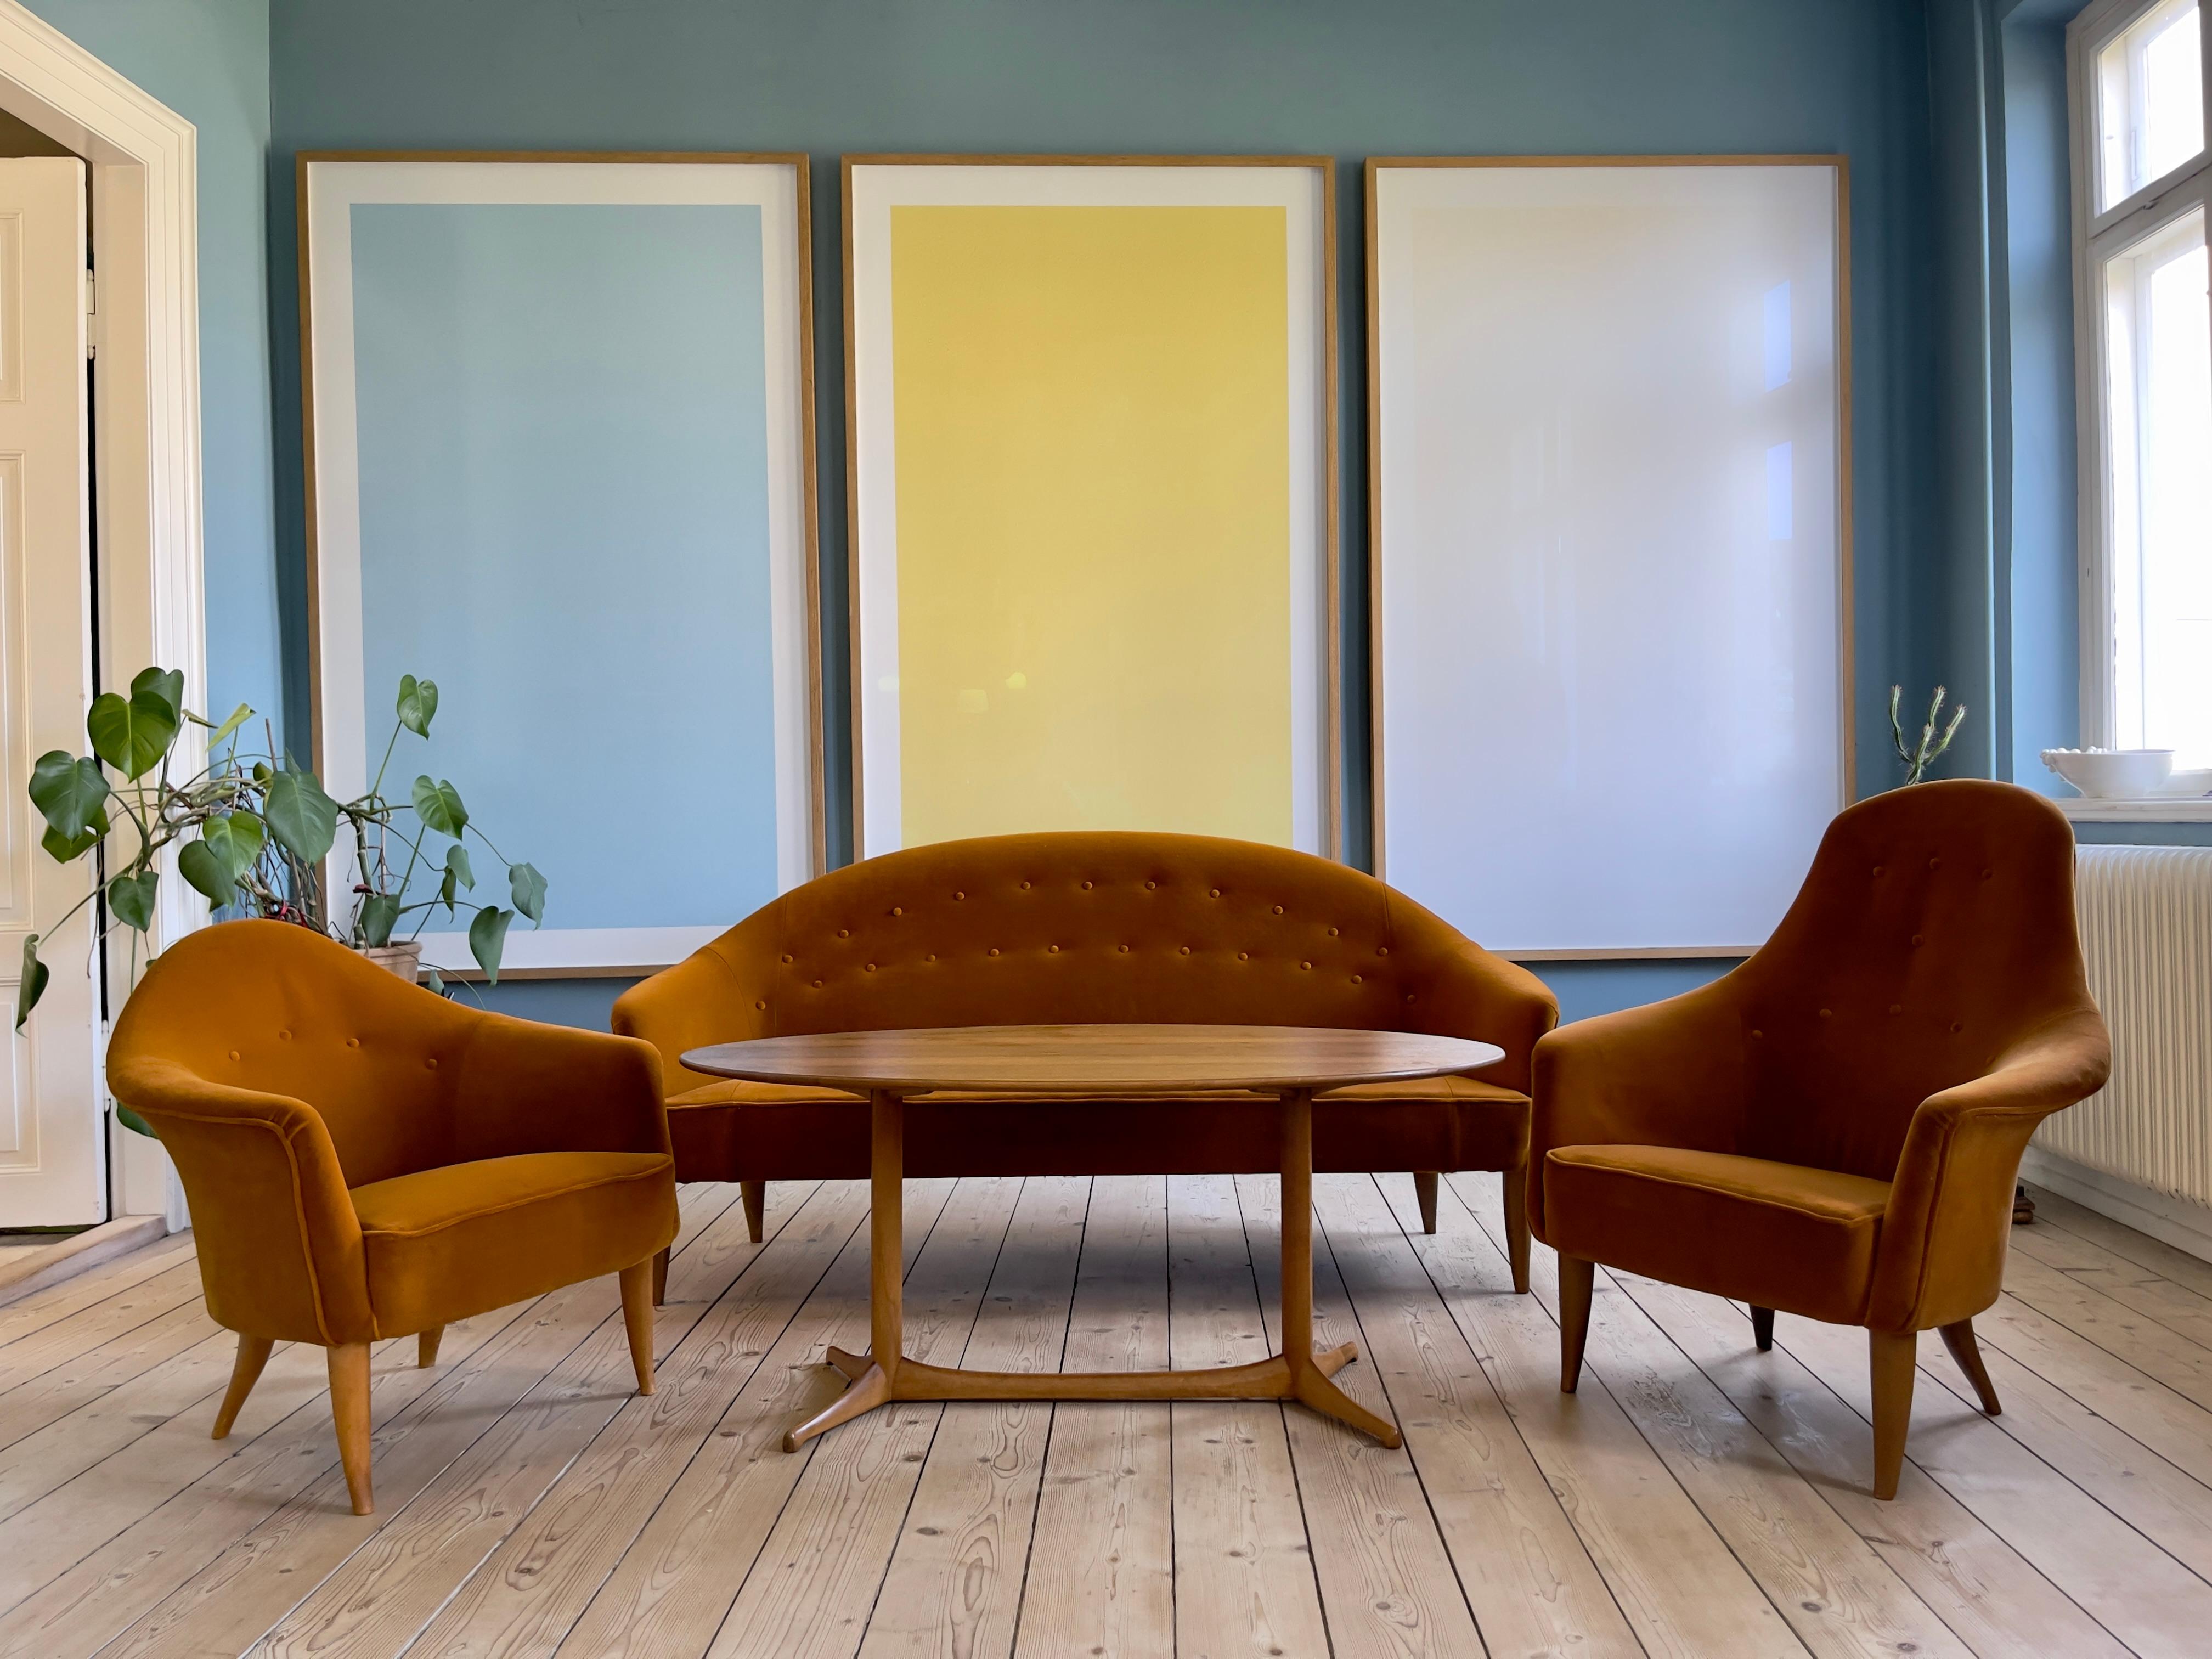 Rare complete living room set in amber color velvet. The iconic Paradise Collection from the Triva Series, which was created in 1958 by Kerstin Hörlin-Holmquist during her time as a designer at Nordiska Kompaniet, Sweden.
The set consists of